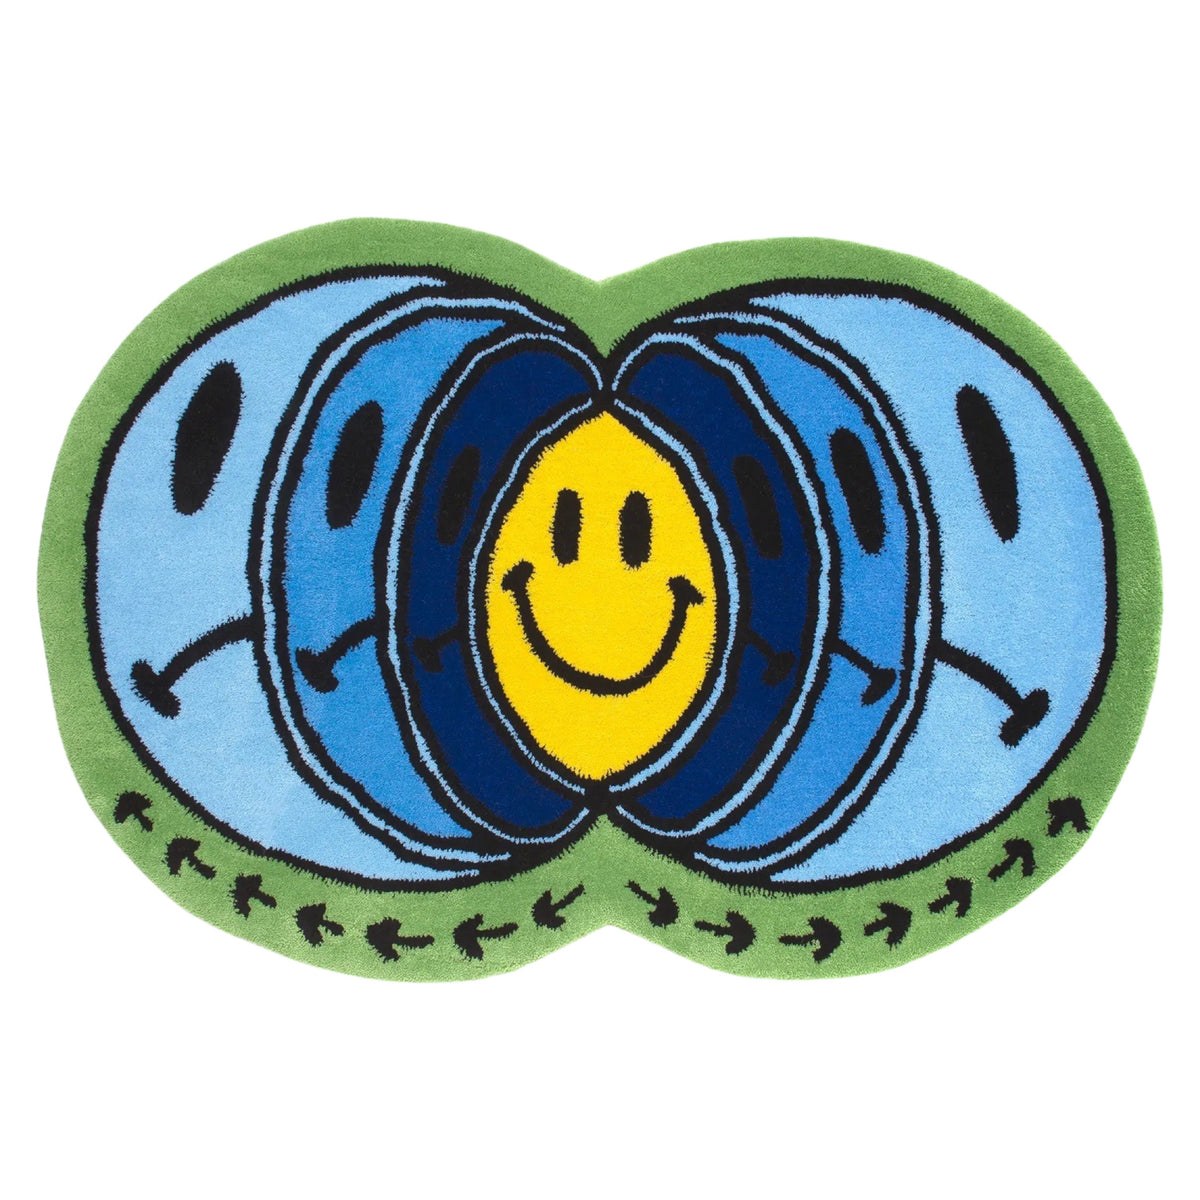 MARKET SMILEY LOOK WITHIN RUG